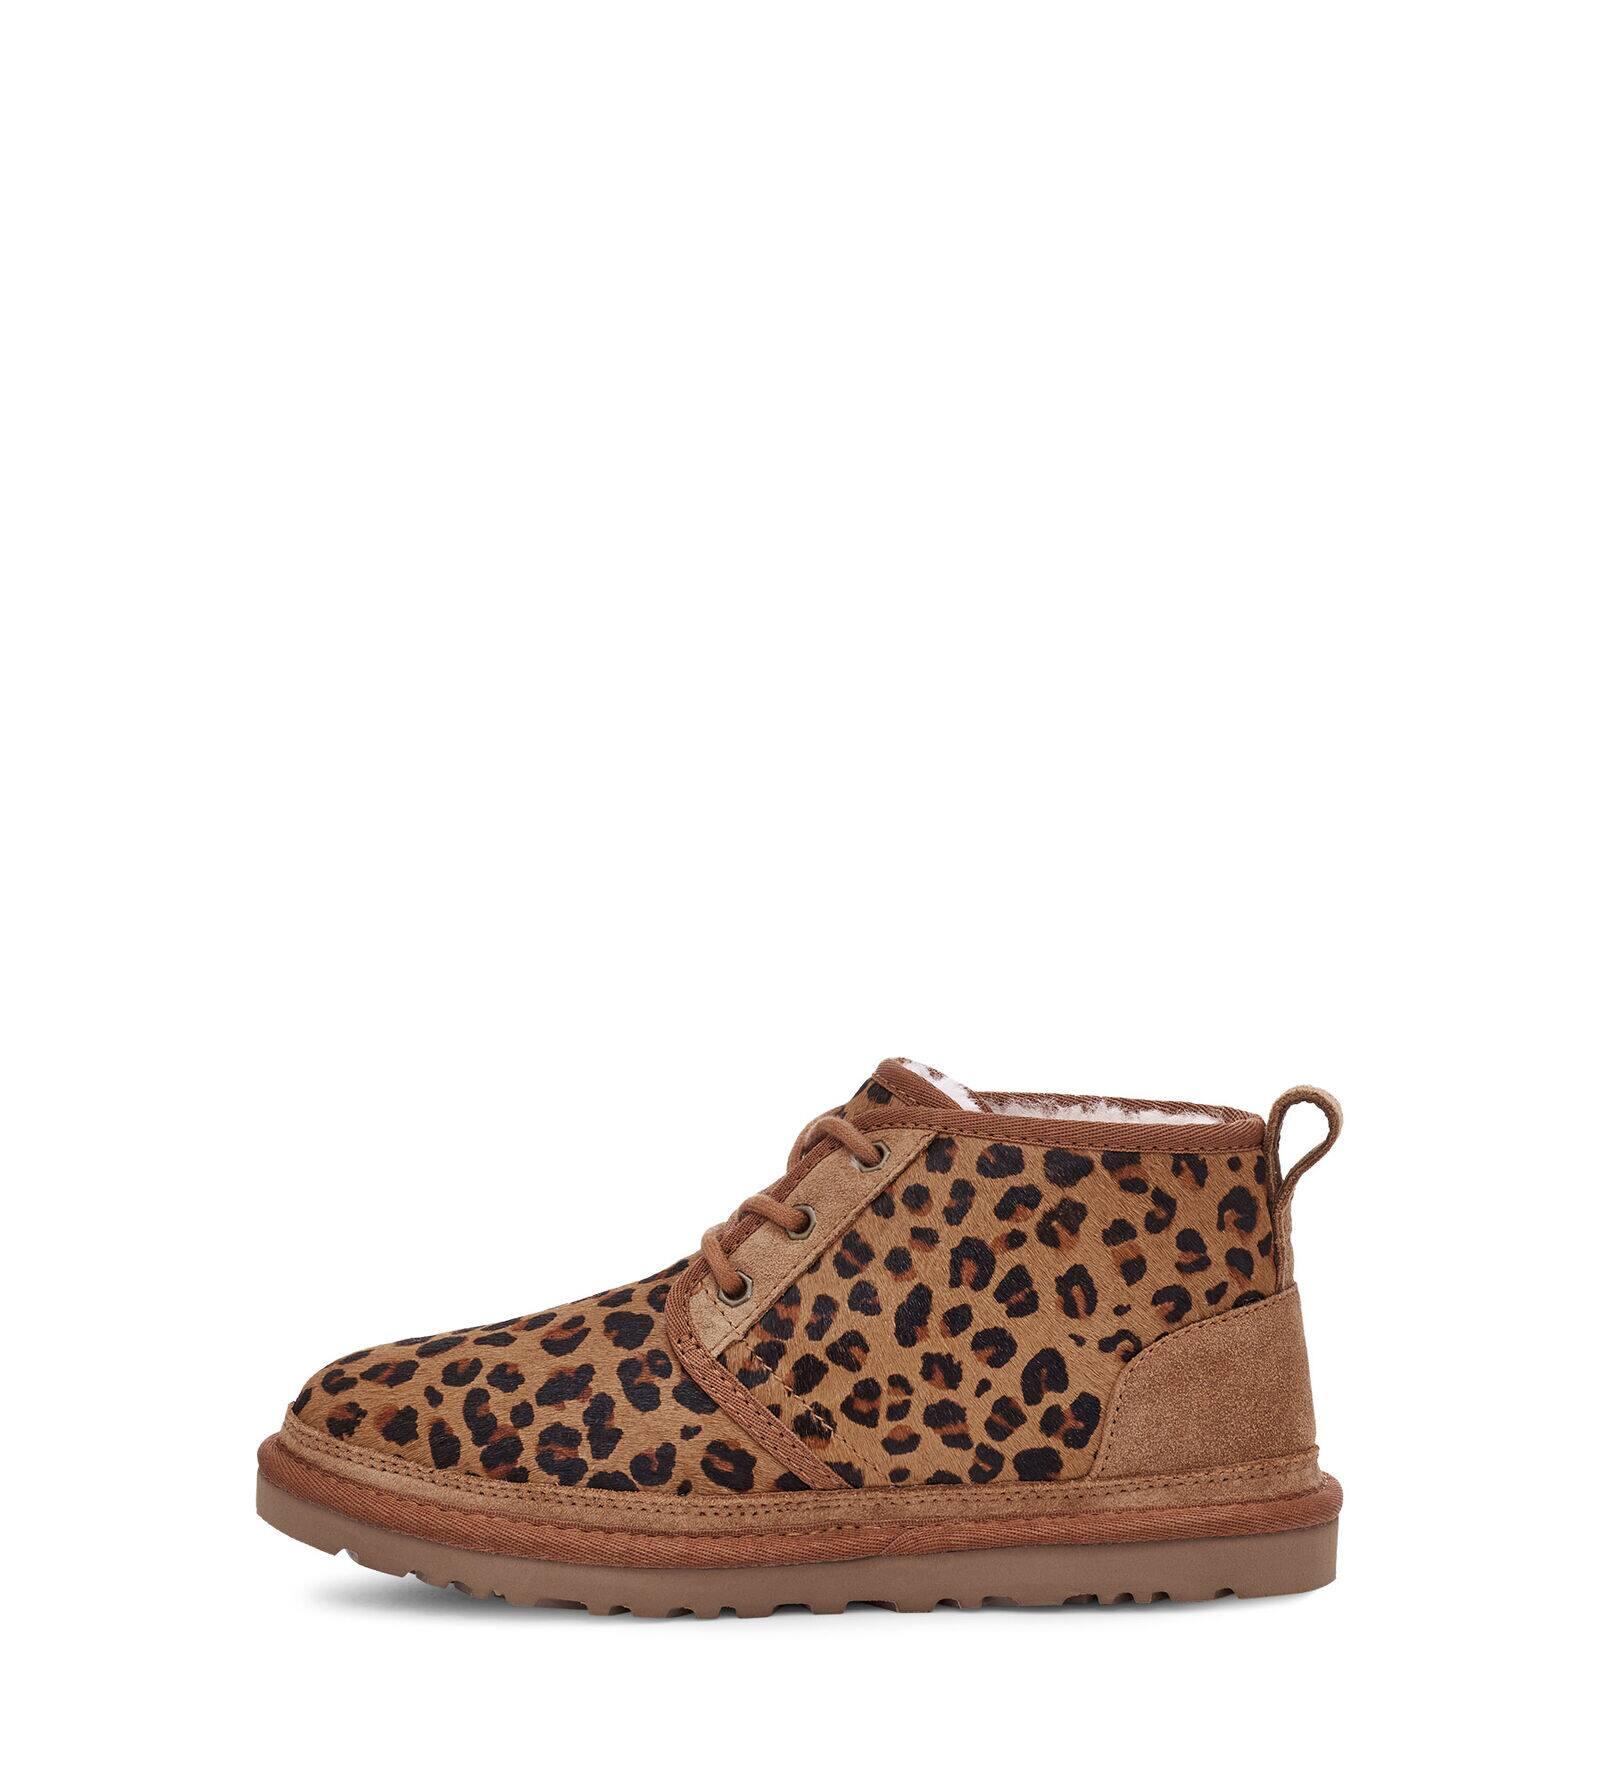 UGG Wool Neumel Leopard Boot in Natural | Lyst